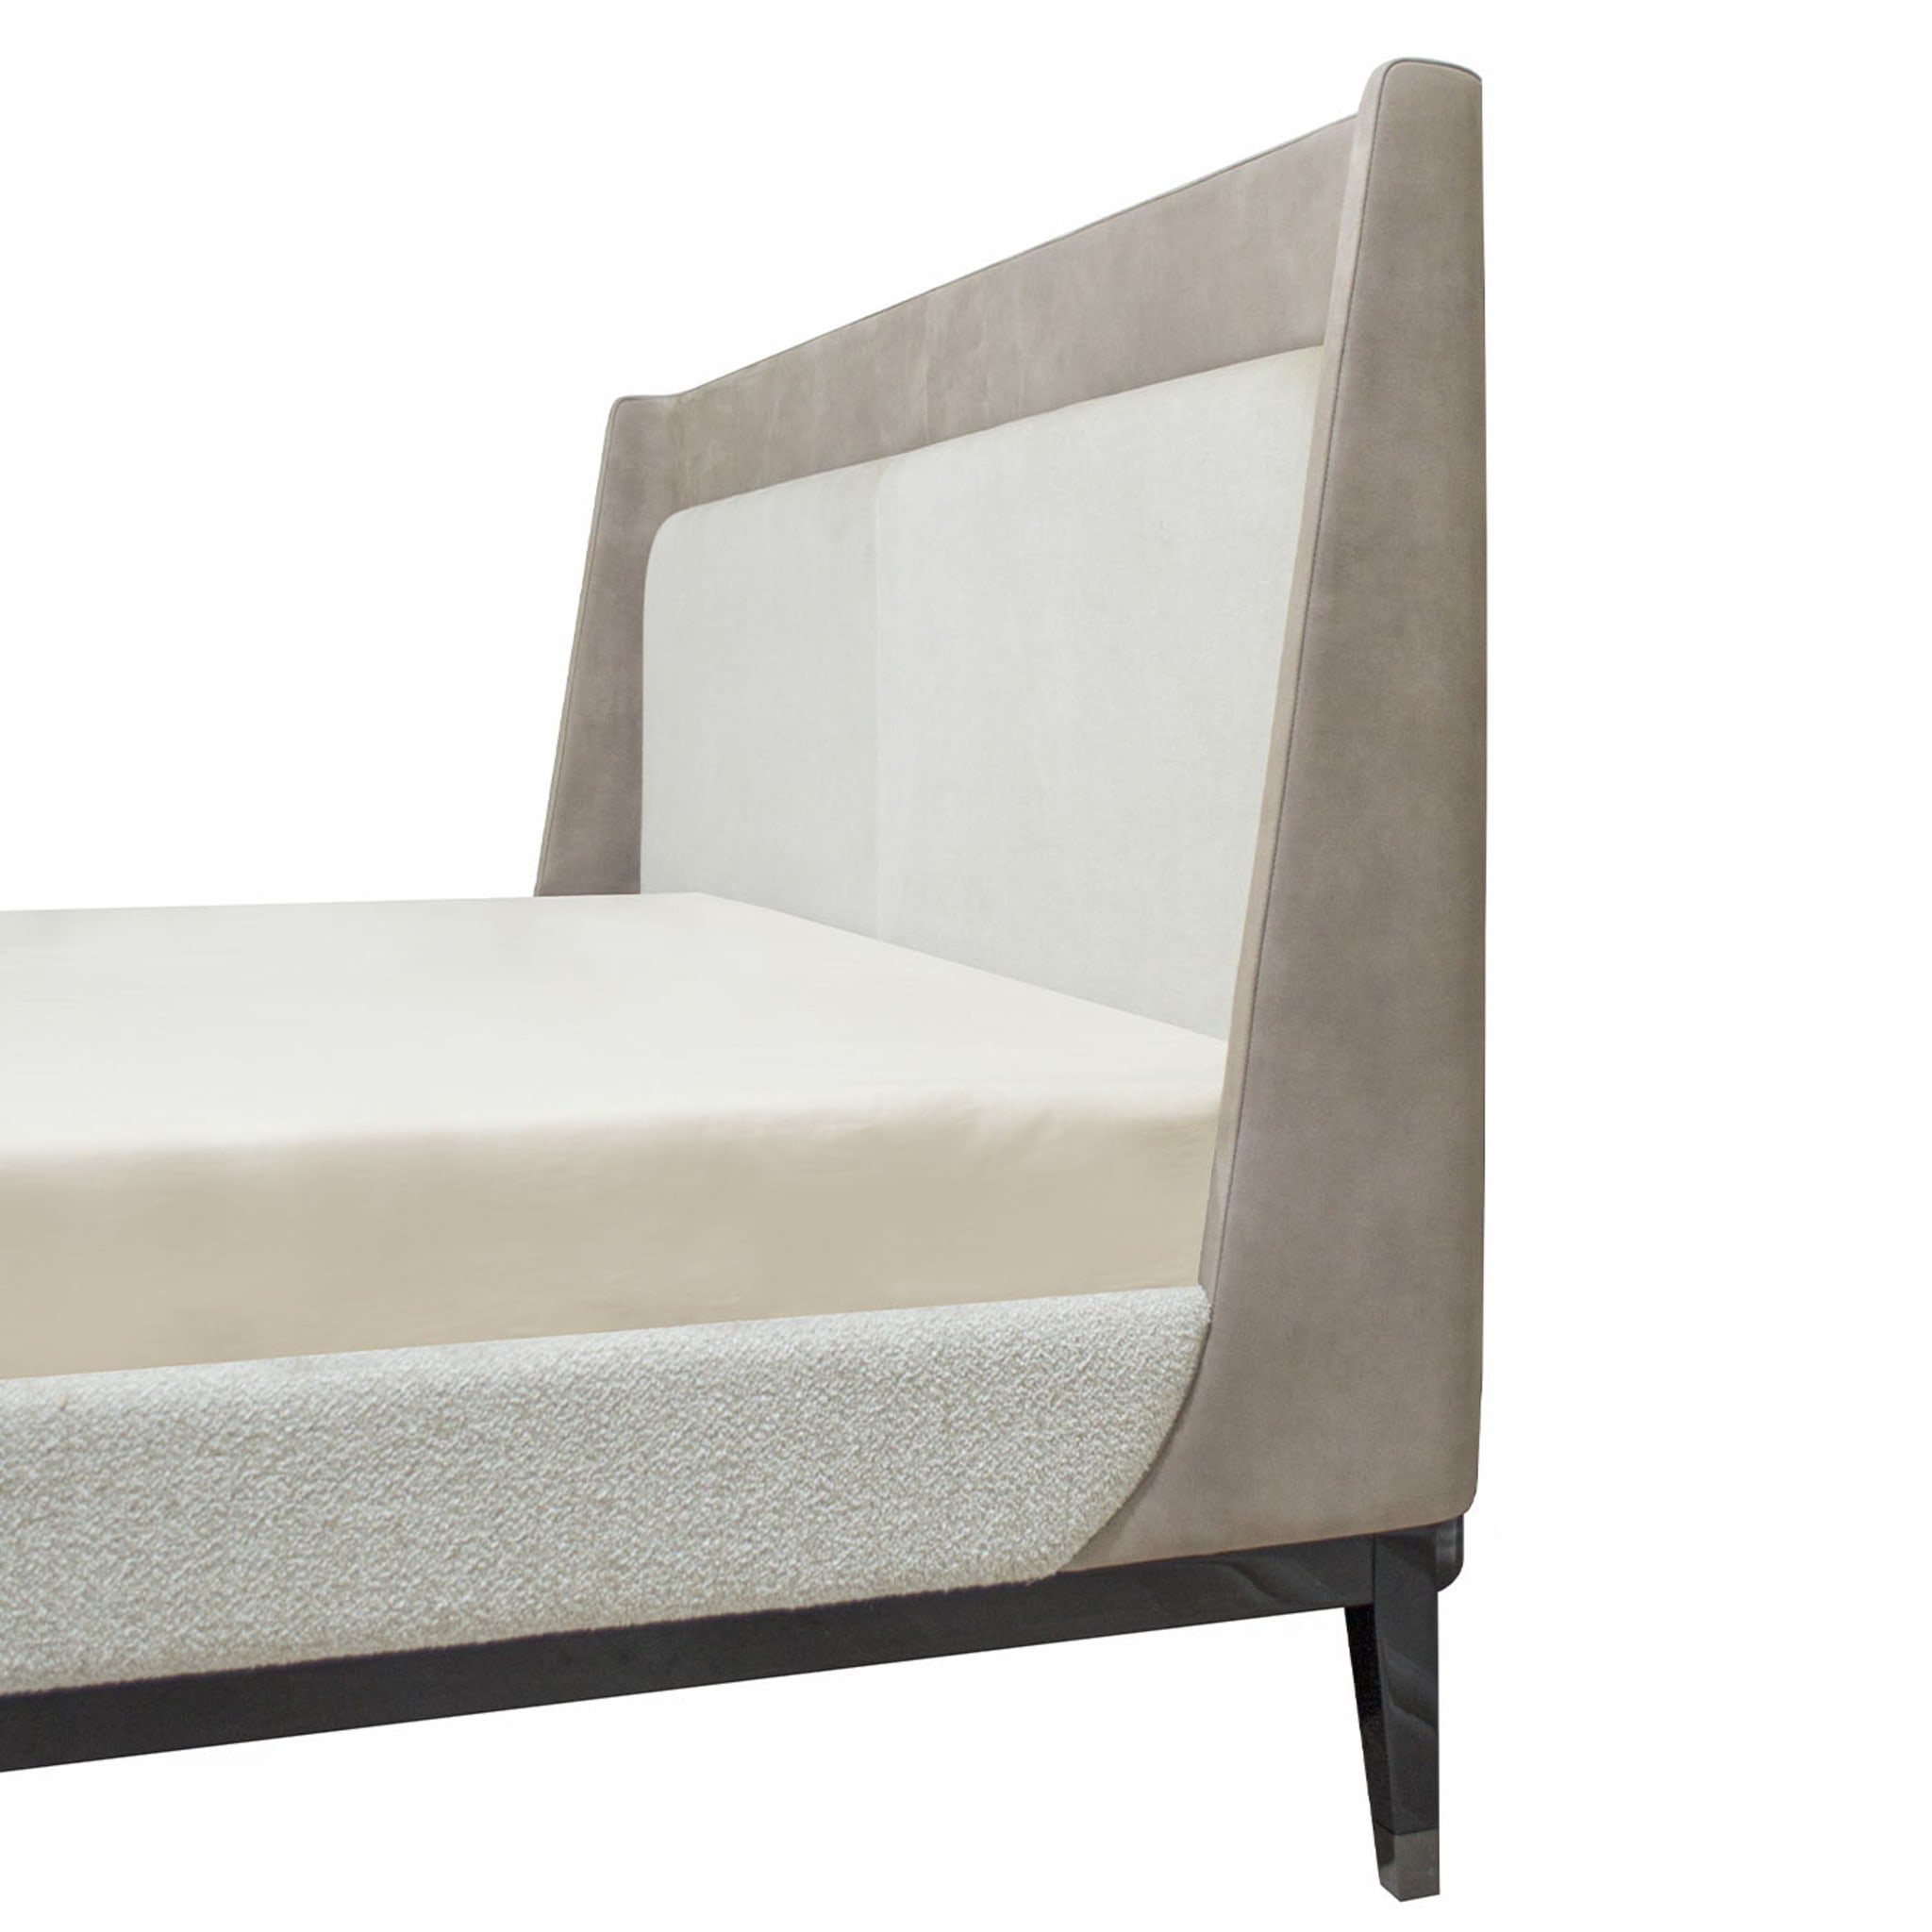 Italian Bed Upholstered in Nubuck and Quinoa Boucle Fabric  - Alternative view 1